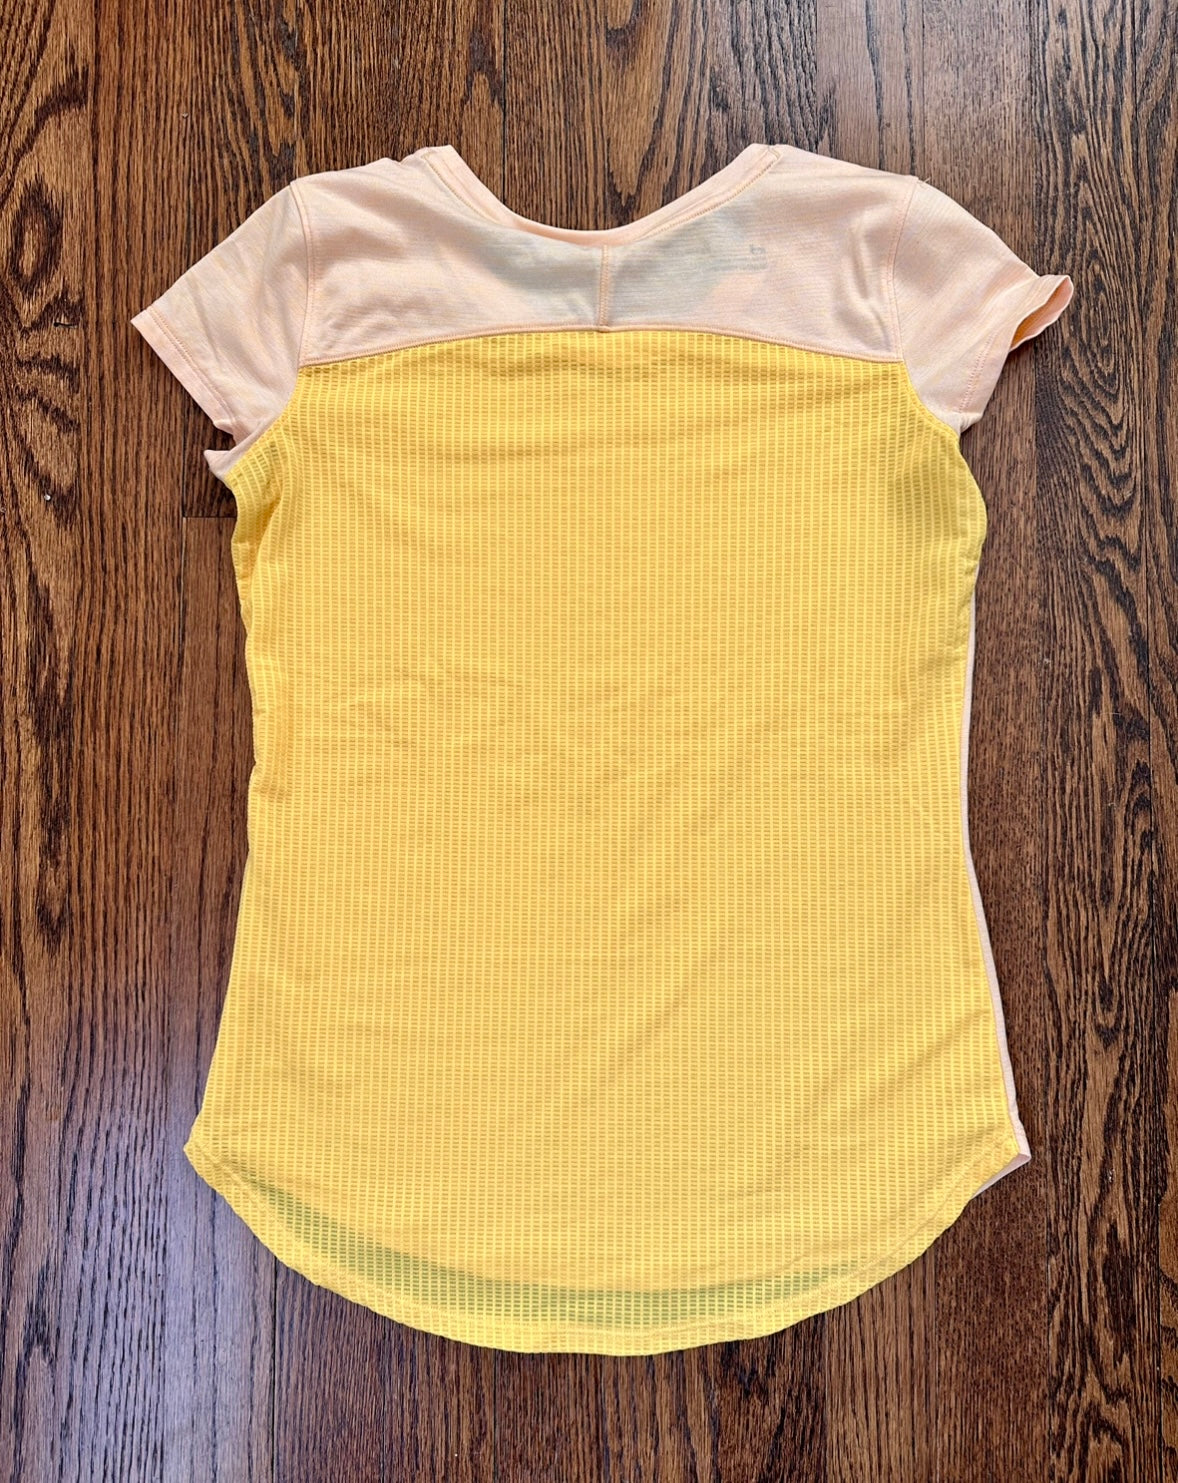 Women's Under Armour Bright Yellow Workout Shirt - size XS